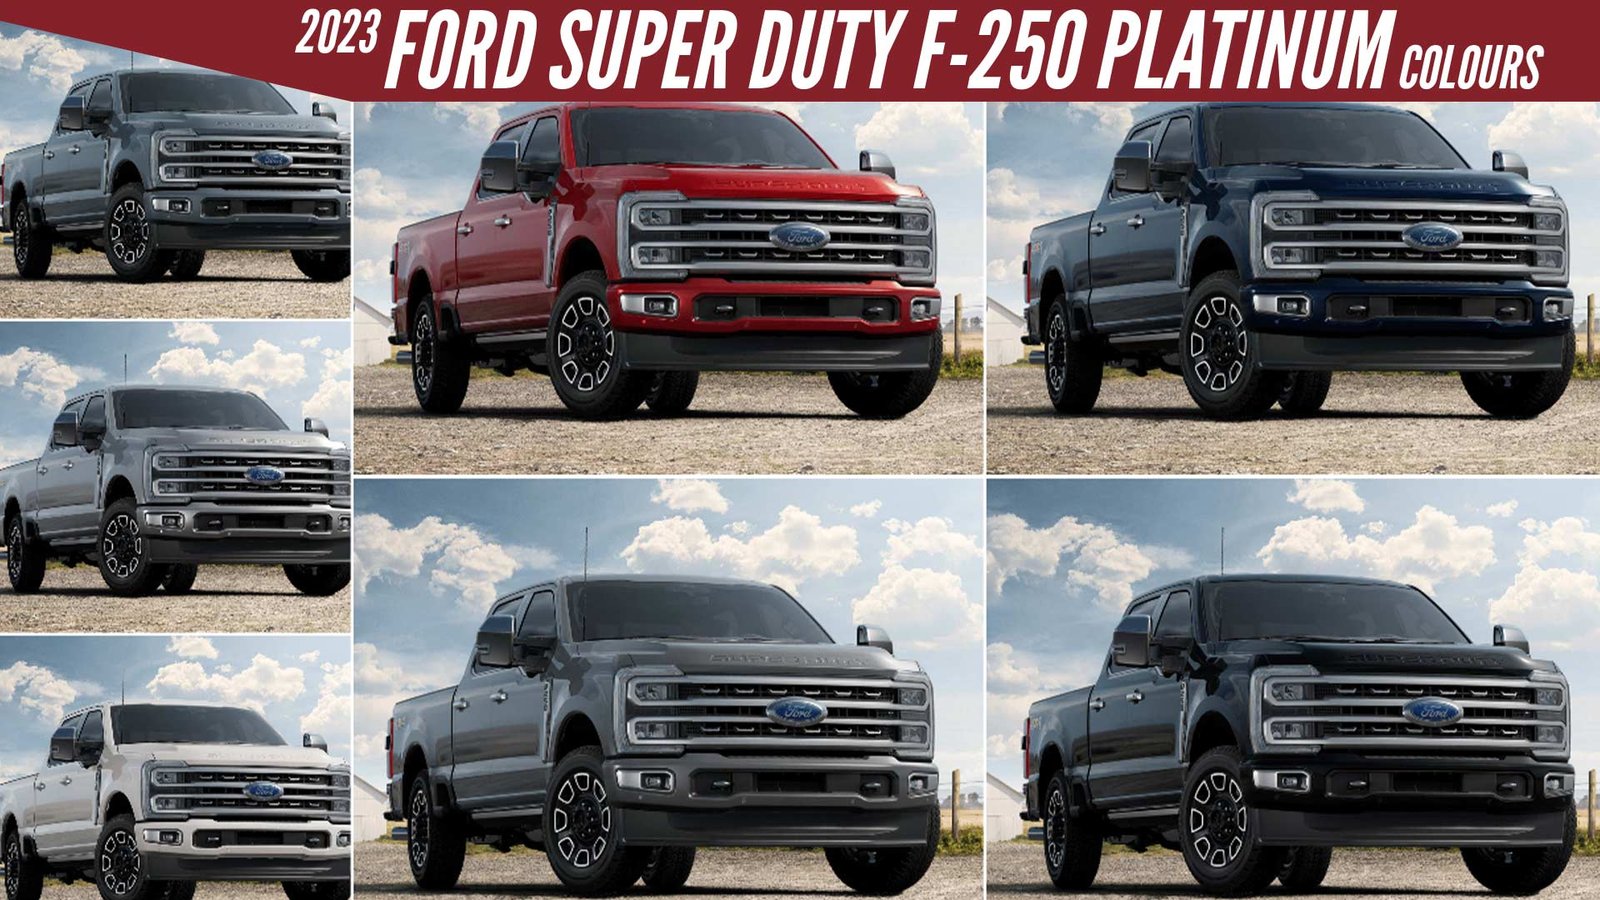 2023 Ford Super Duty F250 Platinum Truck All Color Options Images